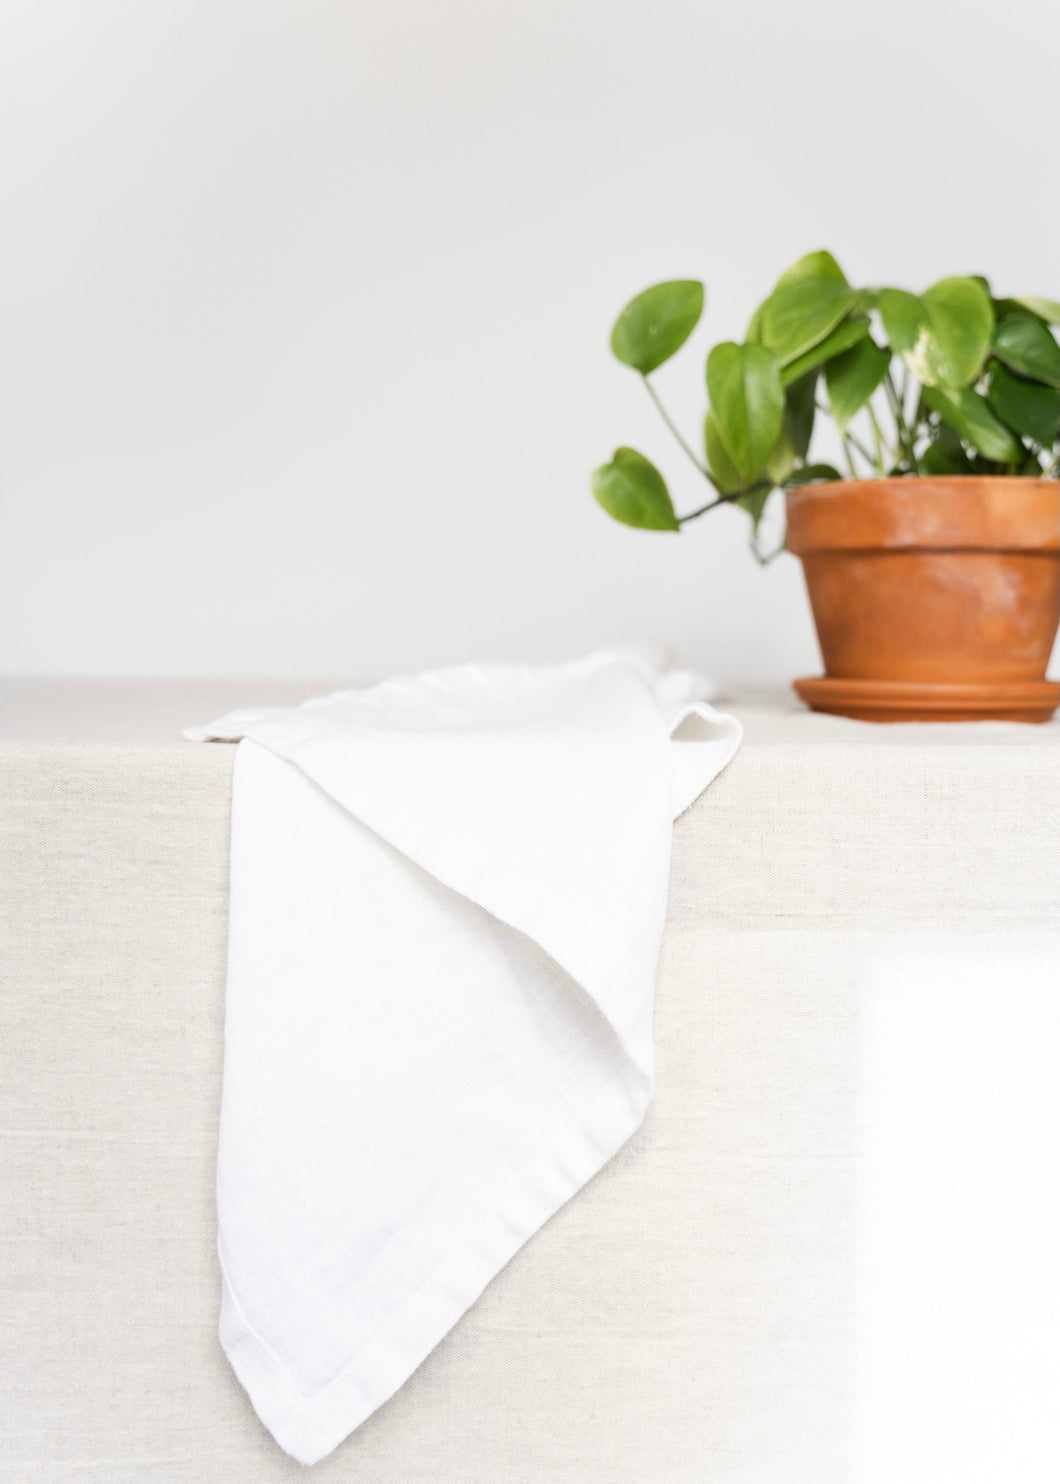 100% Linen Classic Napkins in Simply White - Set of 4